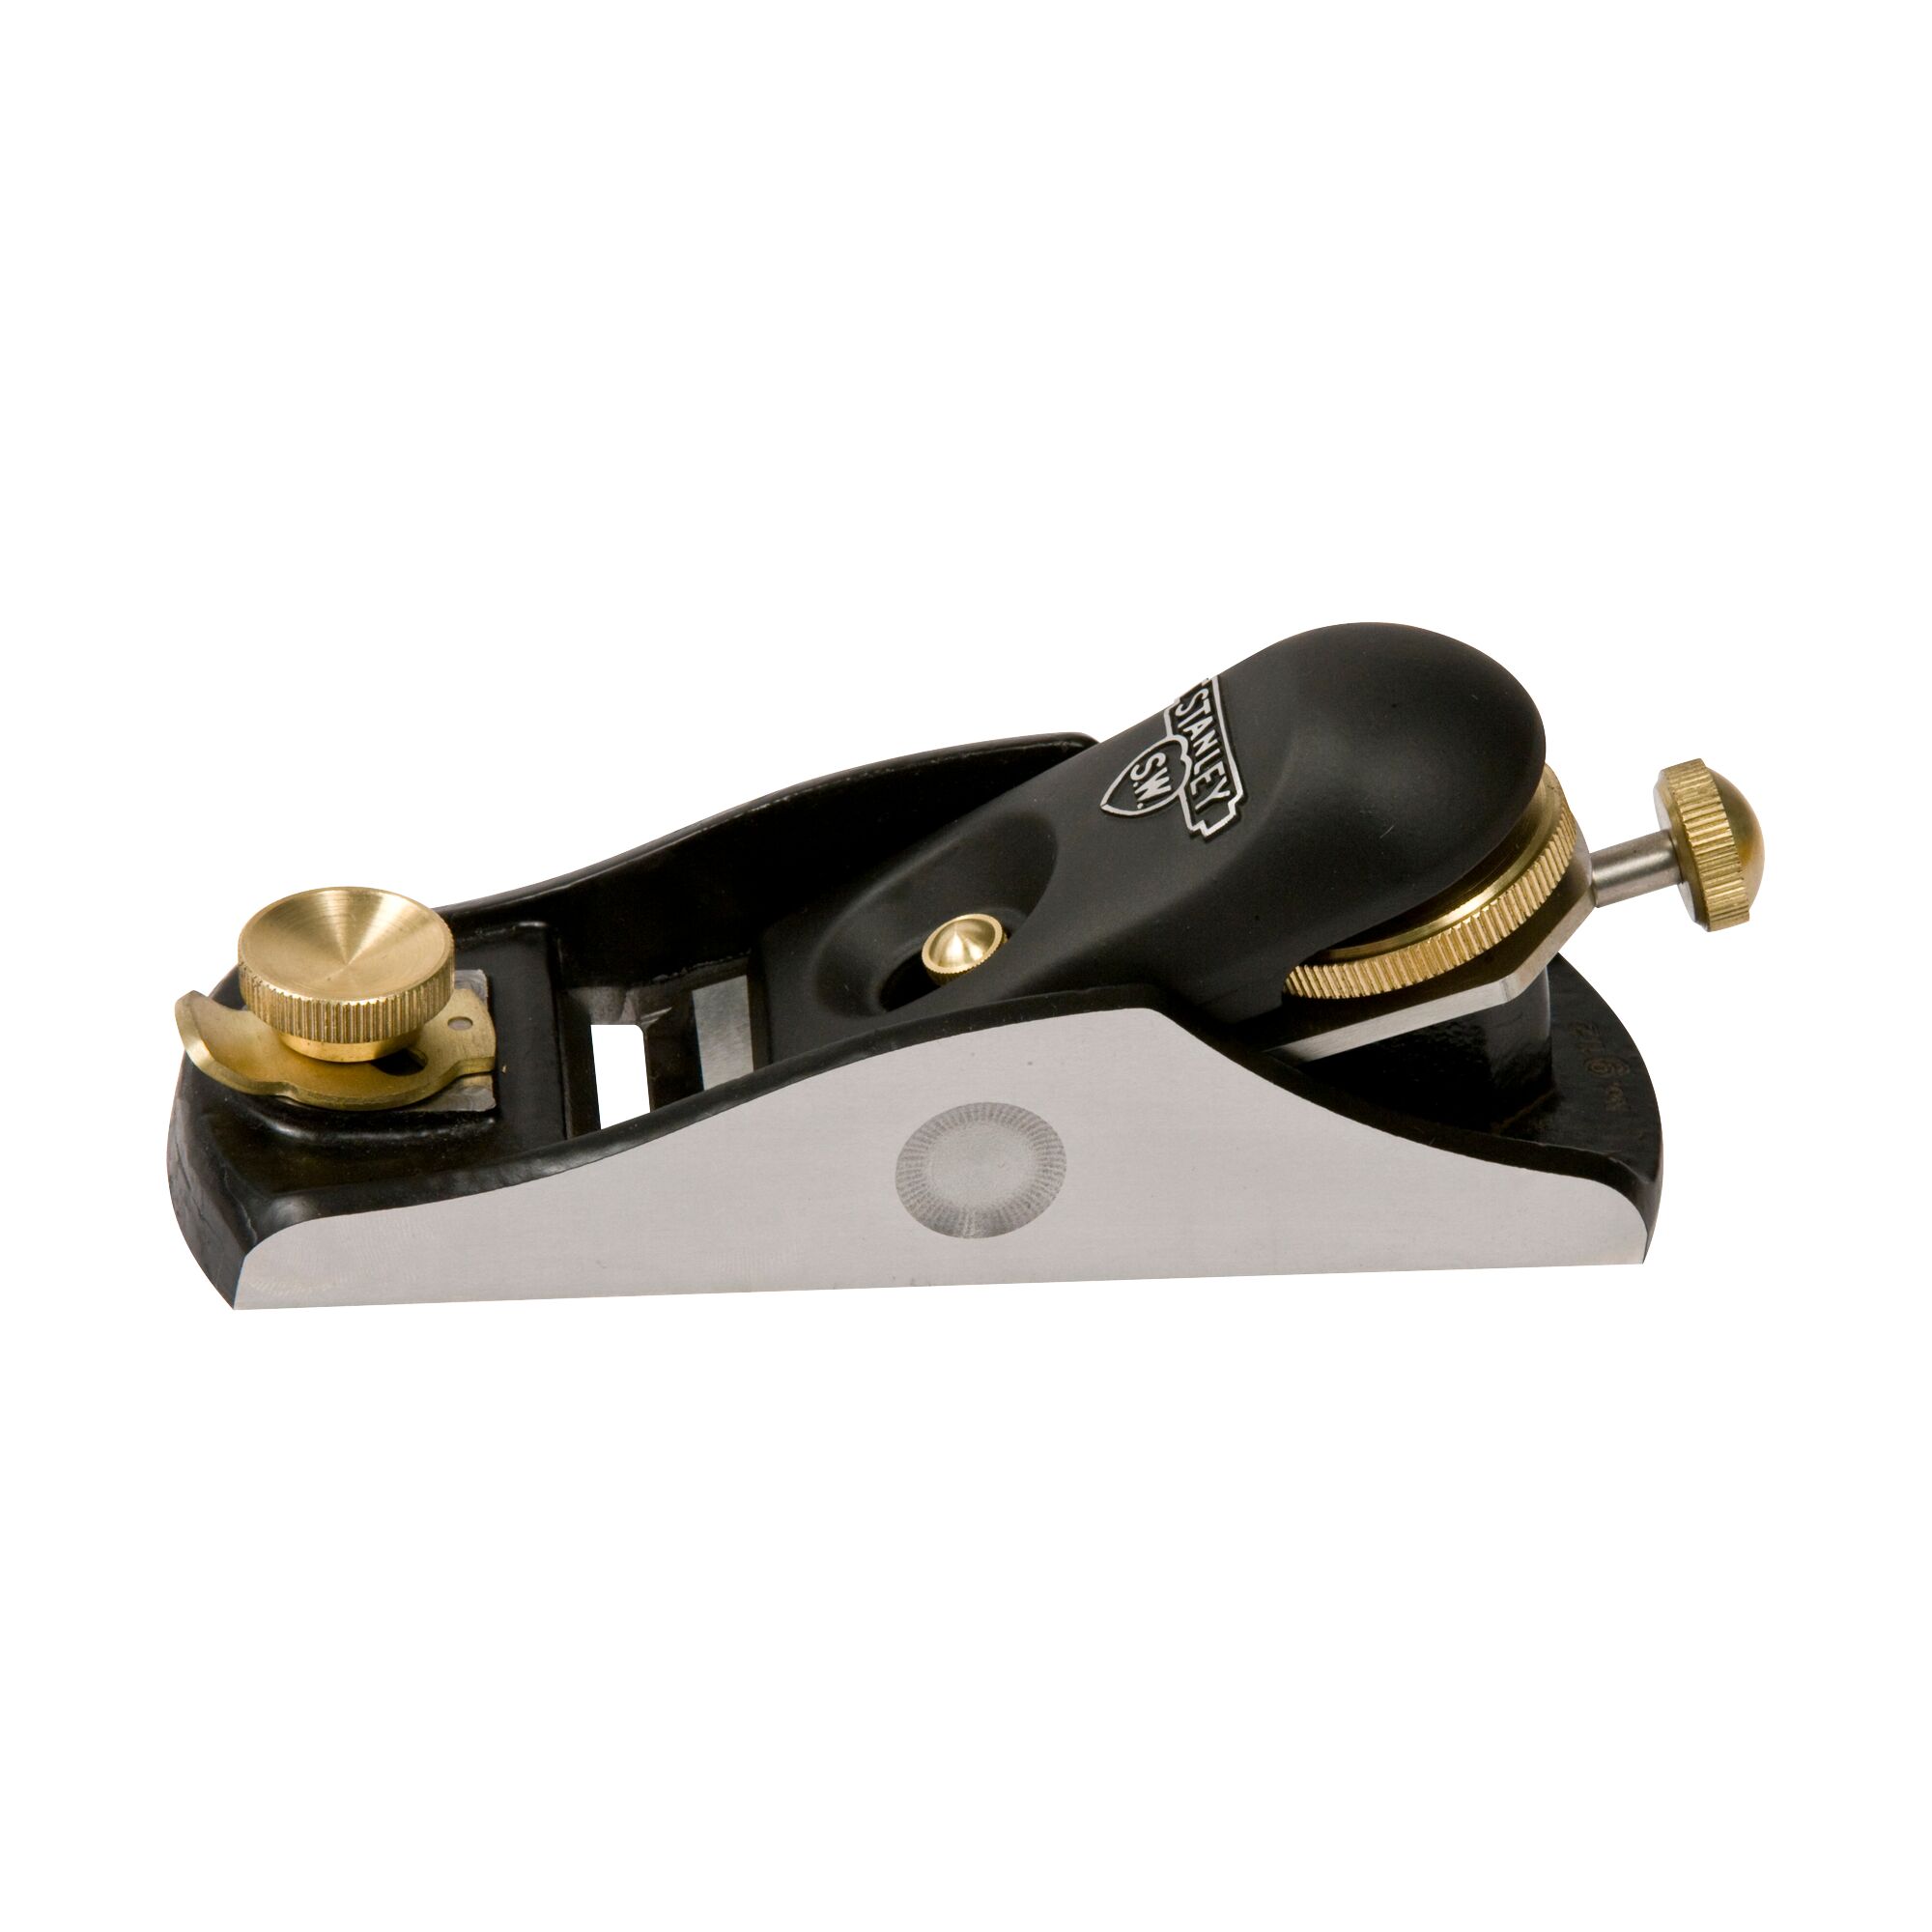 Stanley Sweetheart No 9-1/2 Block Plane Extra Thick Steel Precision-ground Base 